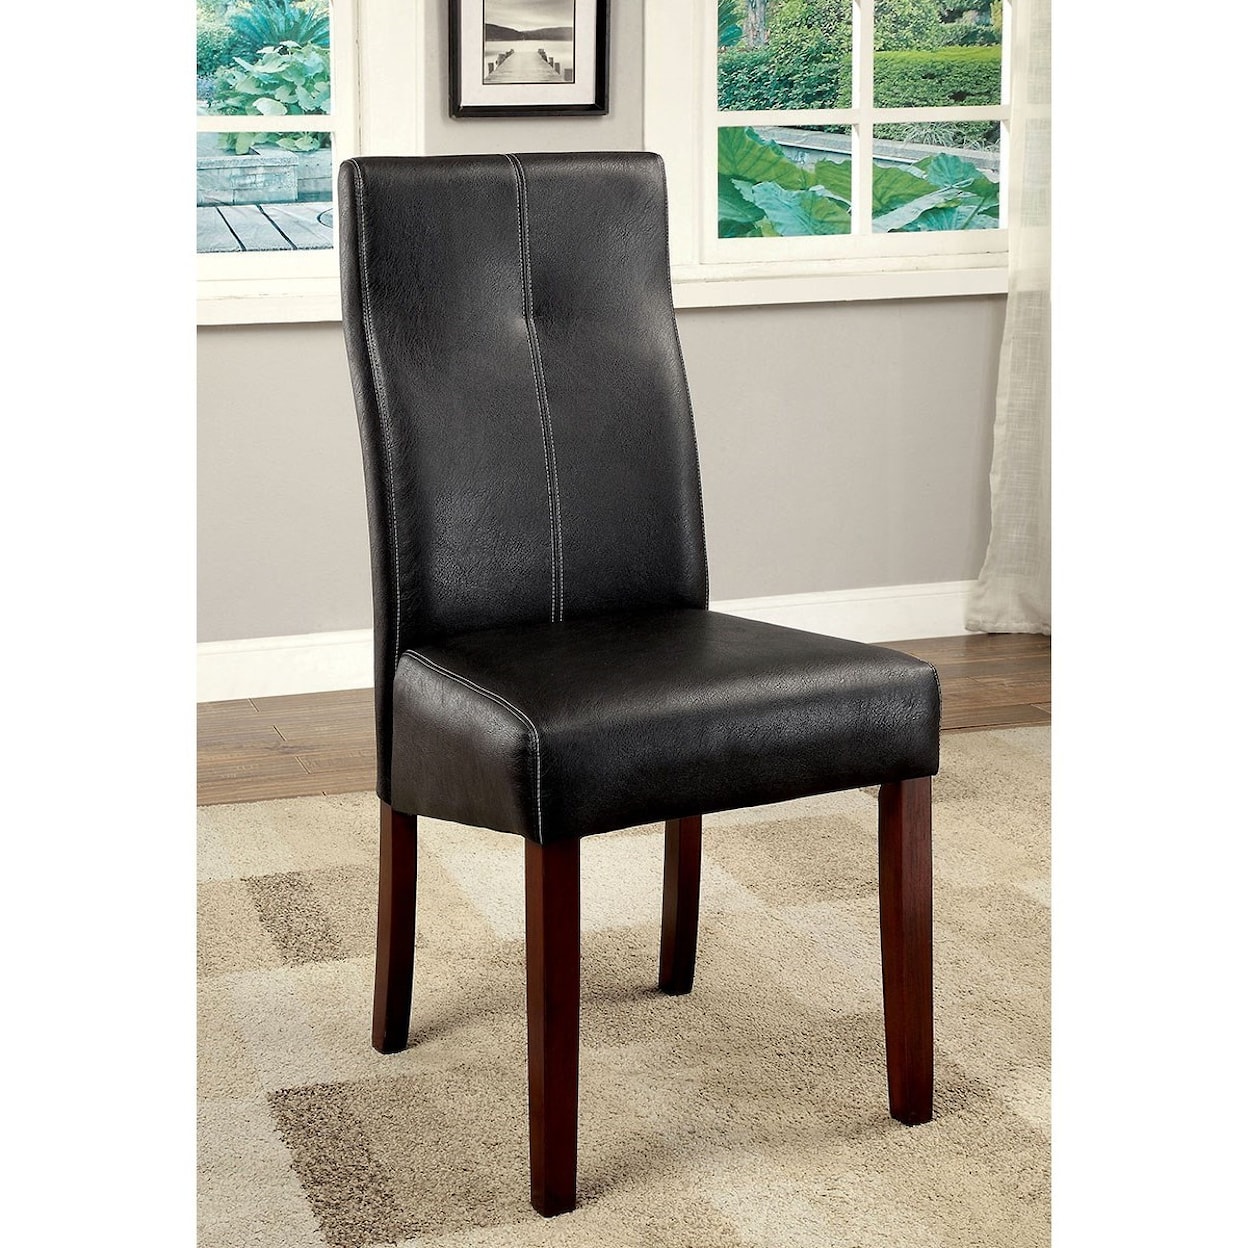 Furniture of America Bonneville I set of 2 Side Chairs